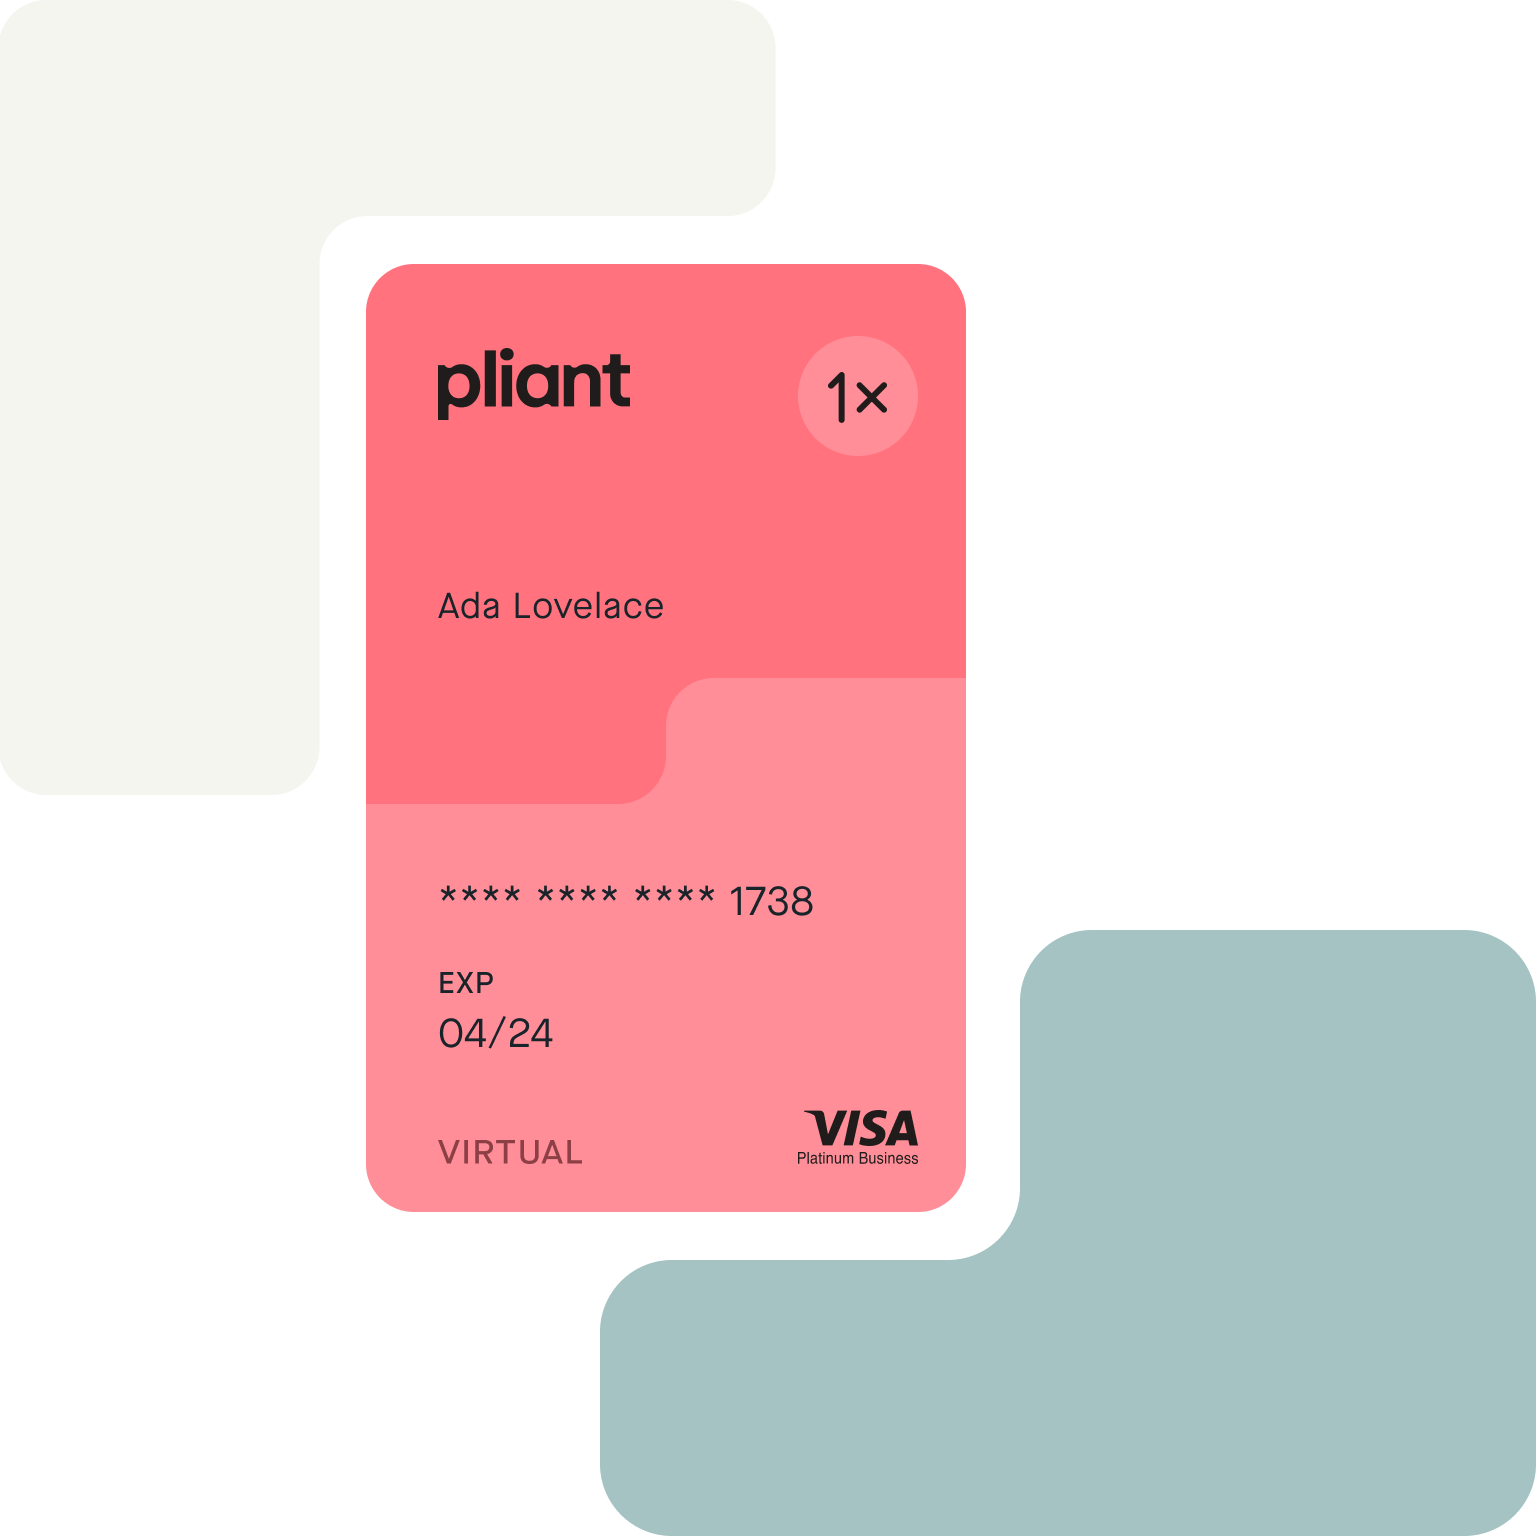 Pliant's single-use virtual cards safety & security